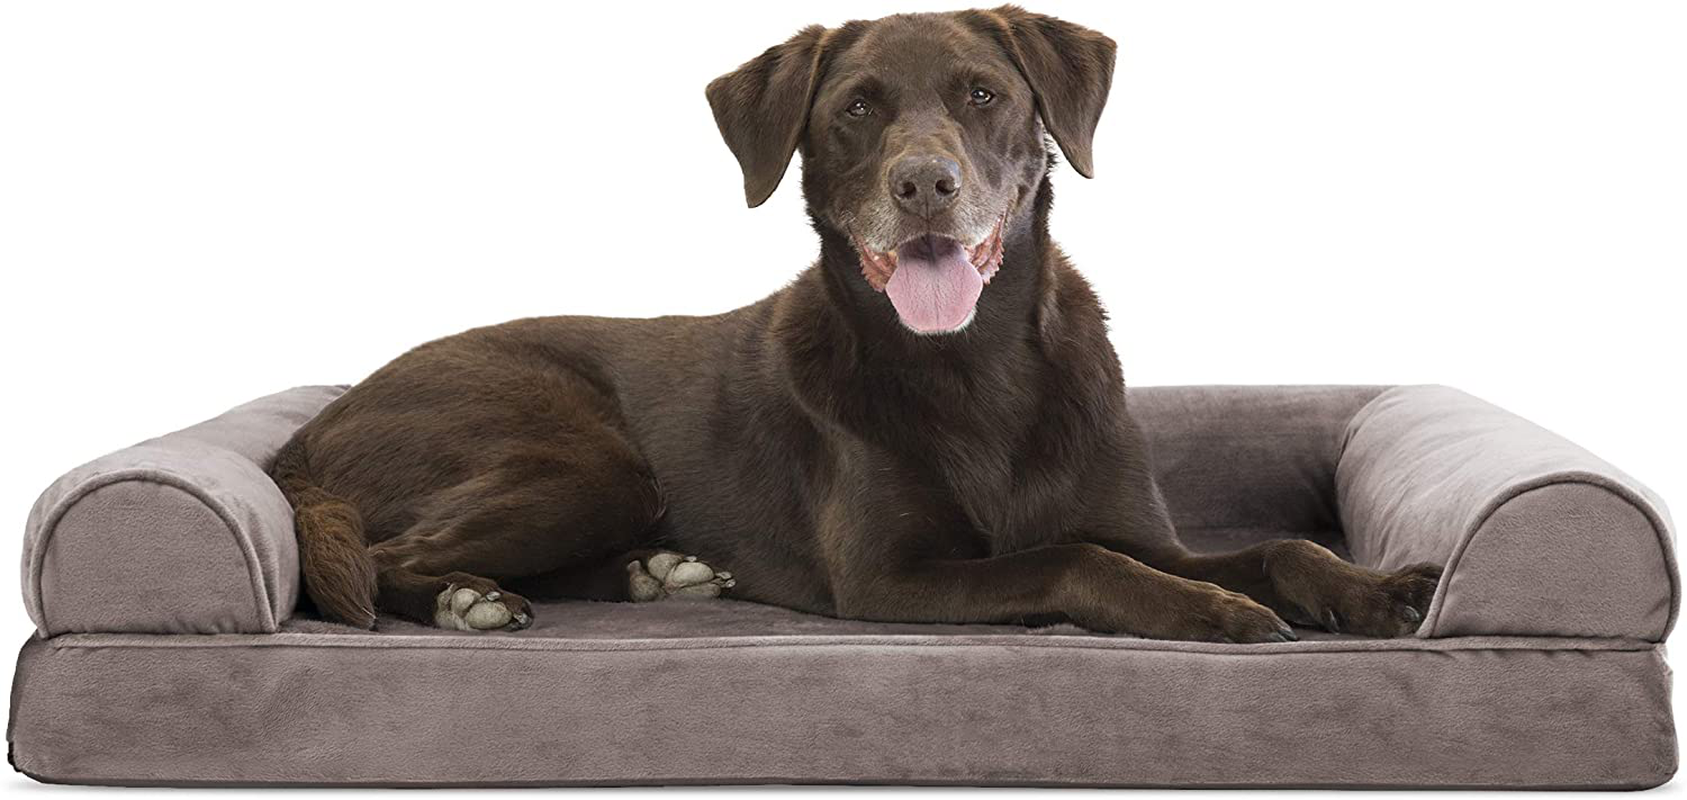 Furhaven Pet Bed for Dogs and Cats - Faux Fur and Velvet Sofa-Style Egg Crate Orthopedic Dog Bed, Removable Machine Washable Cover - Smoke Gray, Large Animals & Pet Supplies > Pet Supplies > Cat Supplies > Cat Beds Furhaven Velvet Driftwood Brown Orthopedic Foam Large